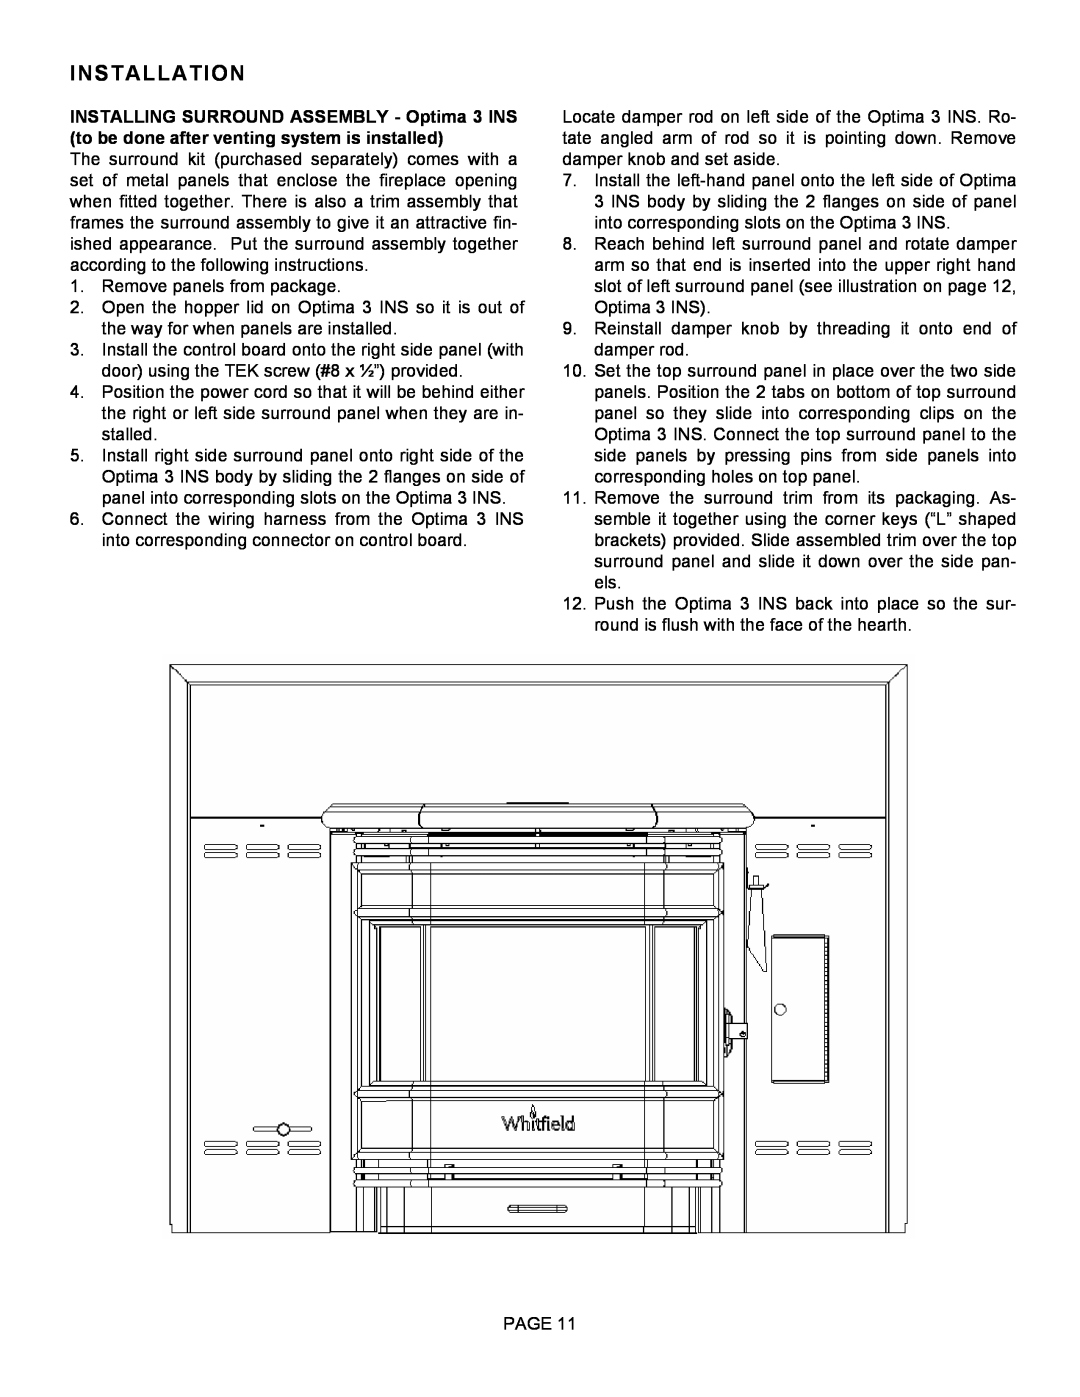 Lenoxx Electronics Optima 3 FS operation manual Installation, Remove panels from package 